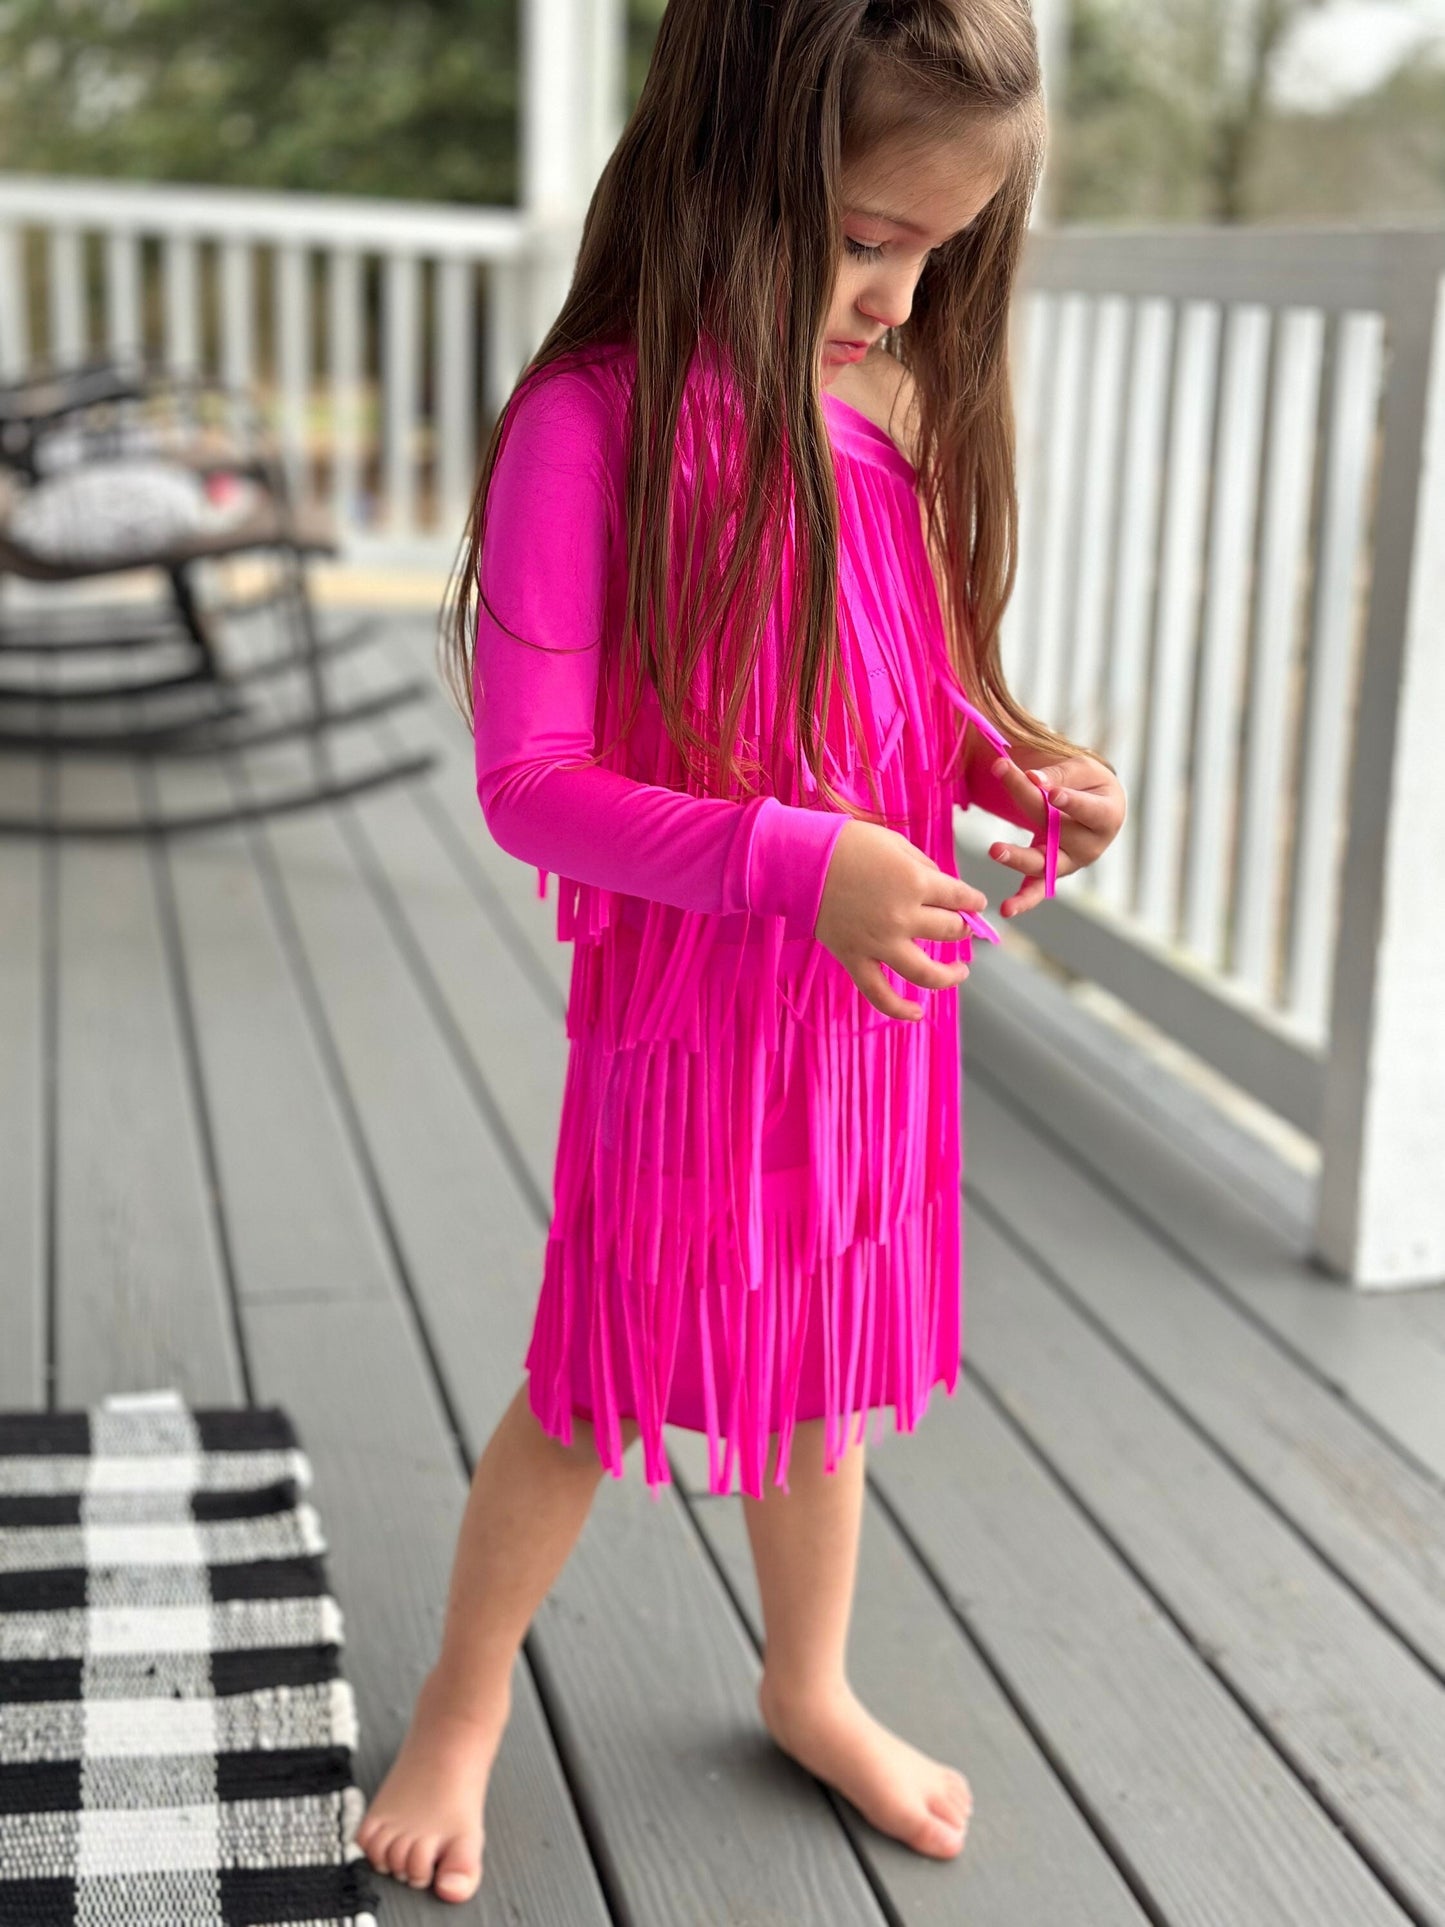 Electric Cowgirl Boho Chic Rodeo Ready One Shoulder Fringe Dress for Free-Spirited Kids - Available in Multiple Colors and Sleeve Styles.